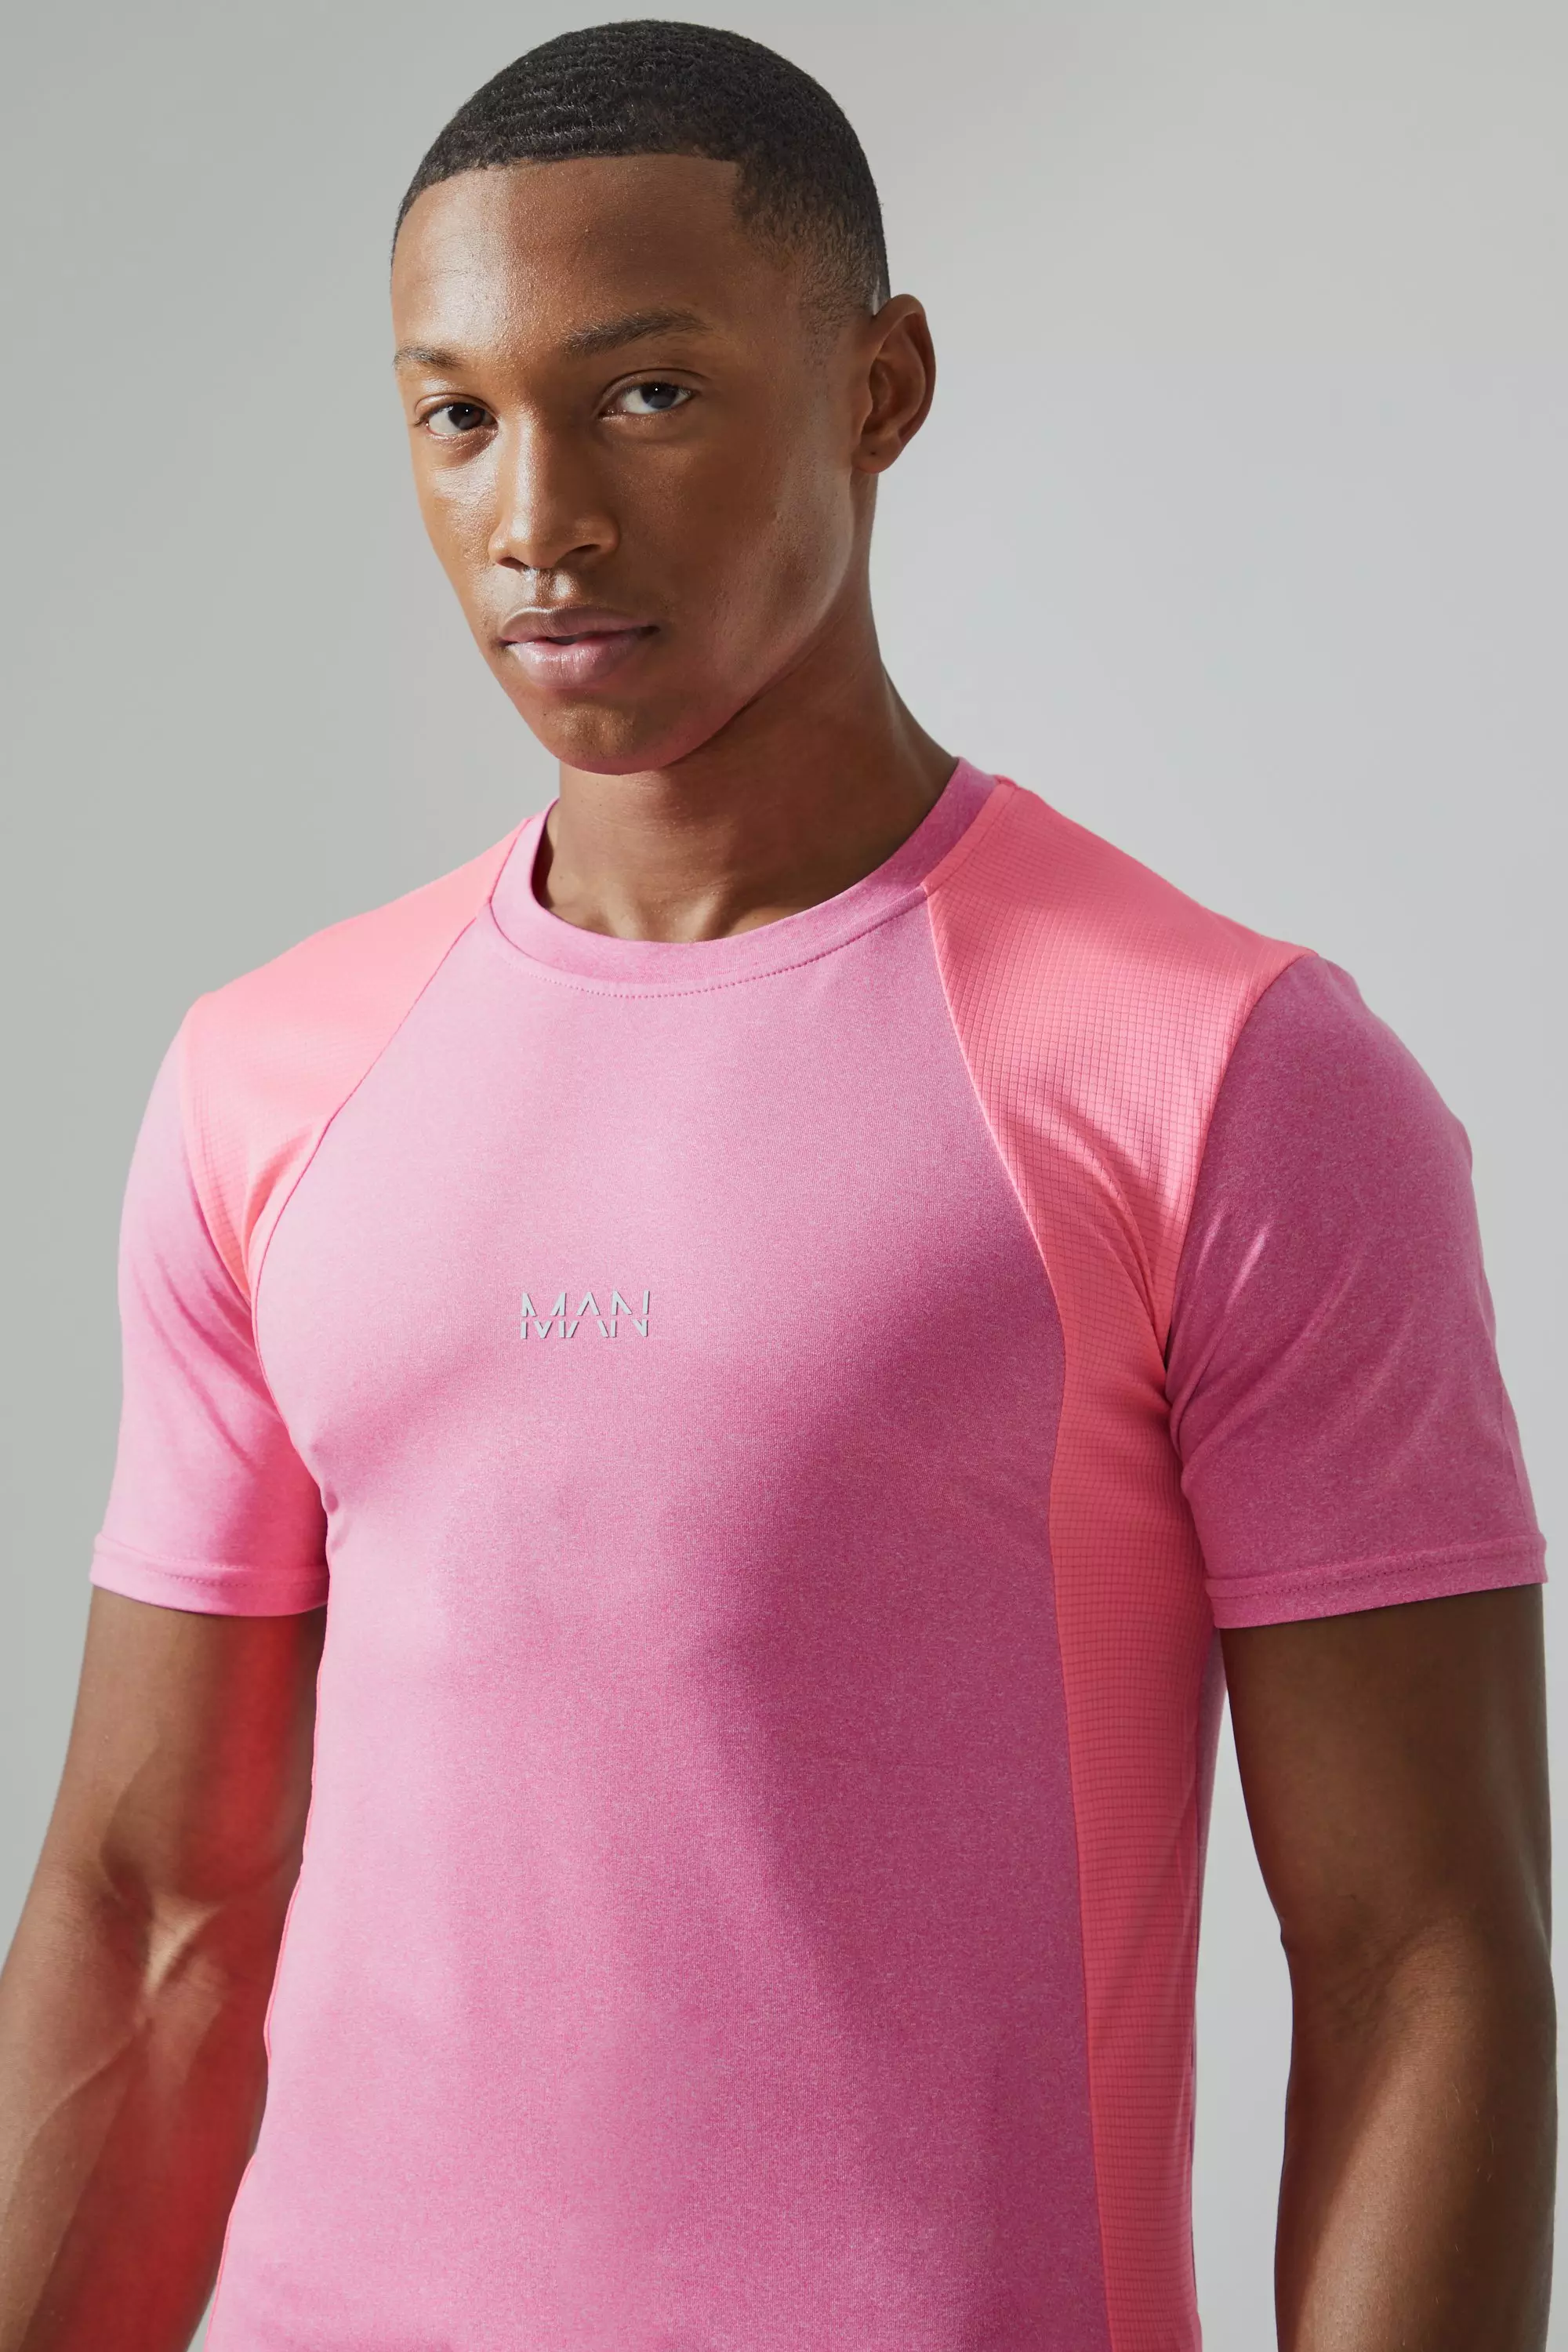 Man Active Mesh Muscle Fit Colour Block T-shirt bright pink